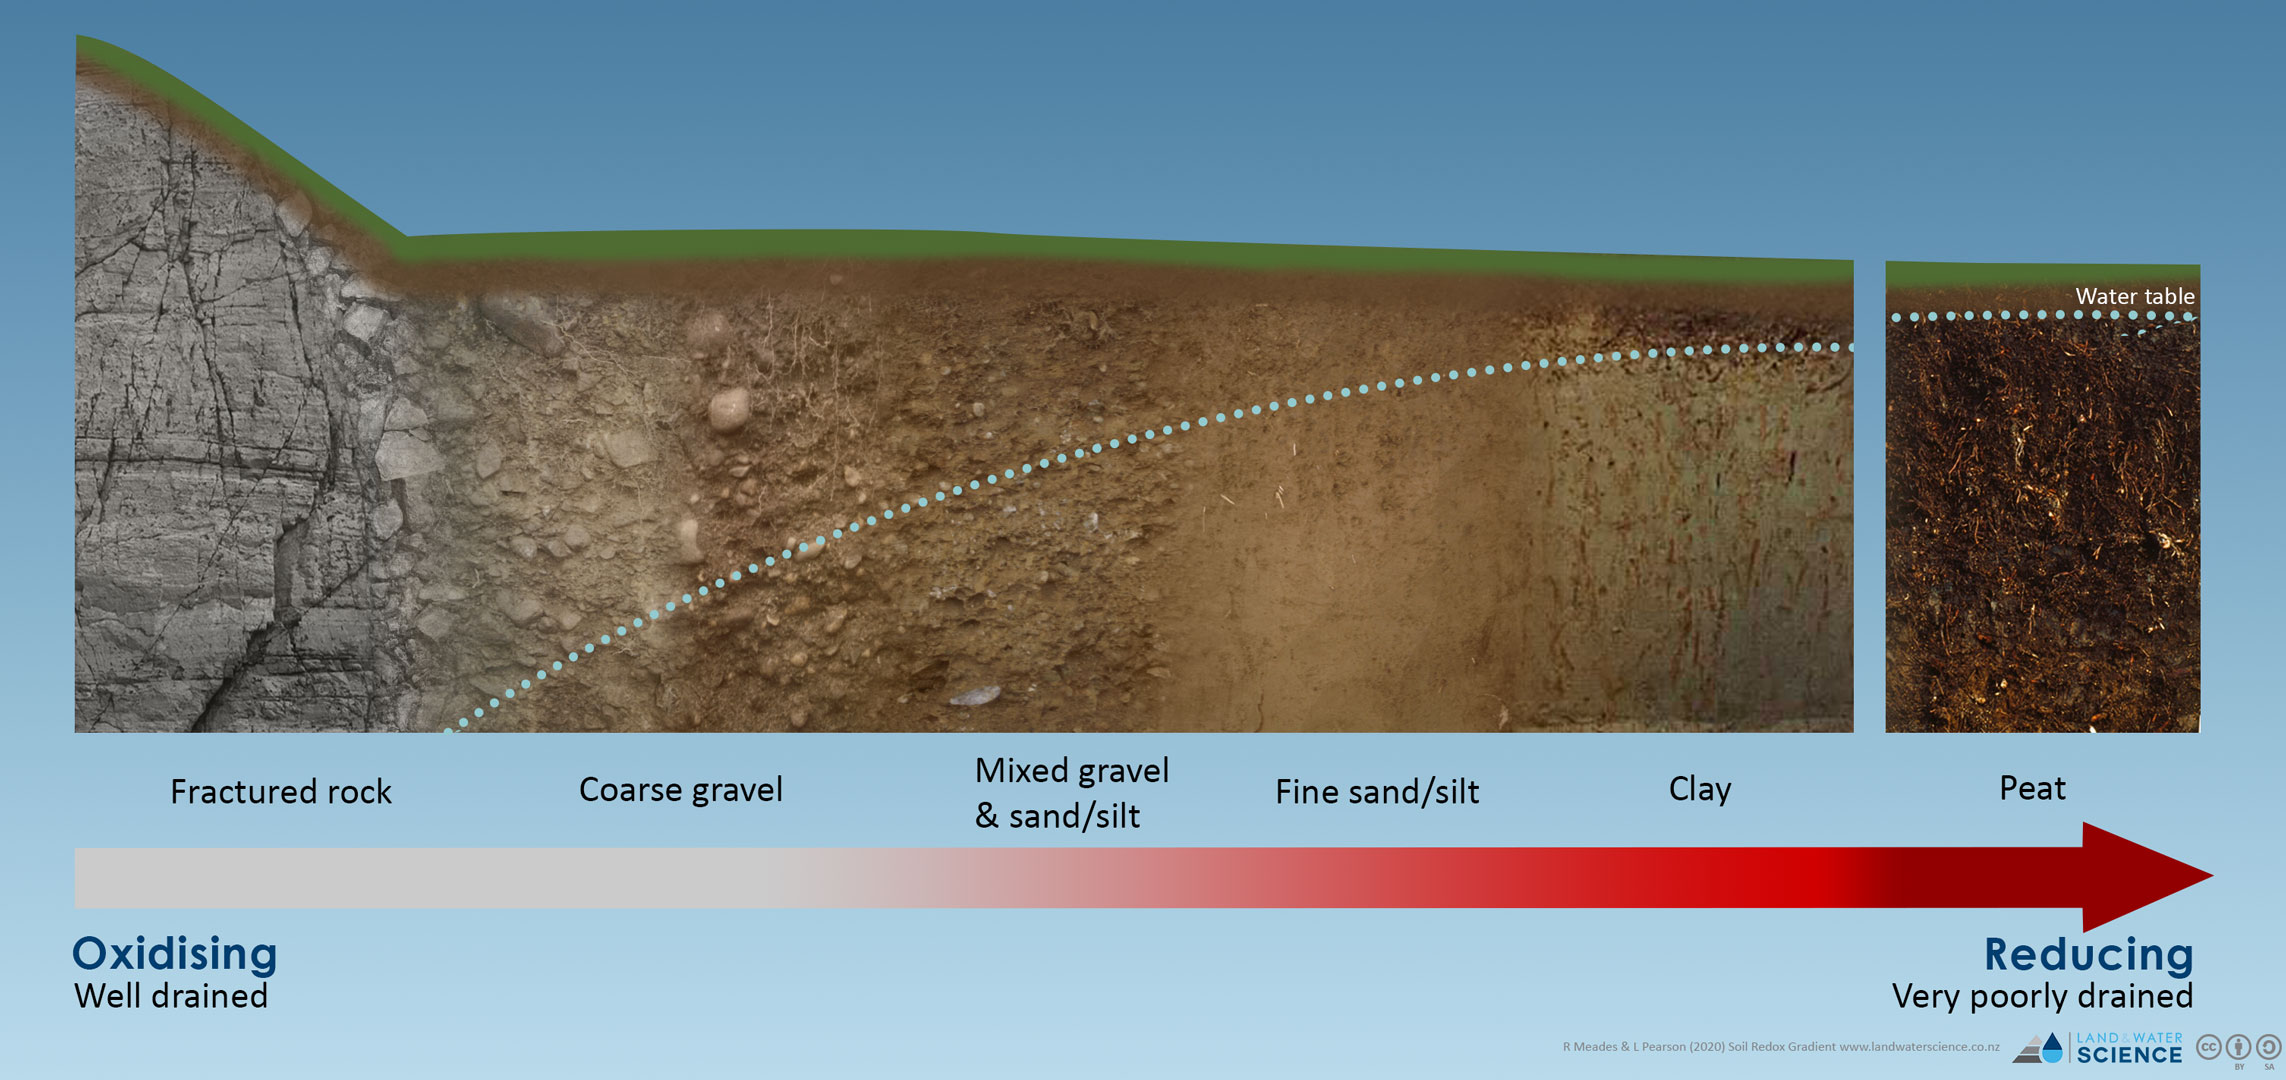 2D diagram showing the soil environment changing from Oxidising to Reducing as the water table and soil type changes.